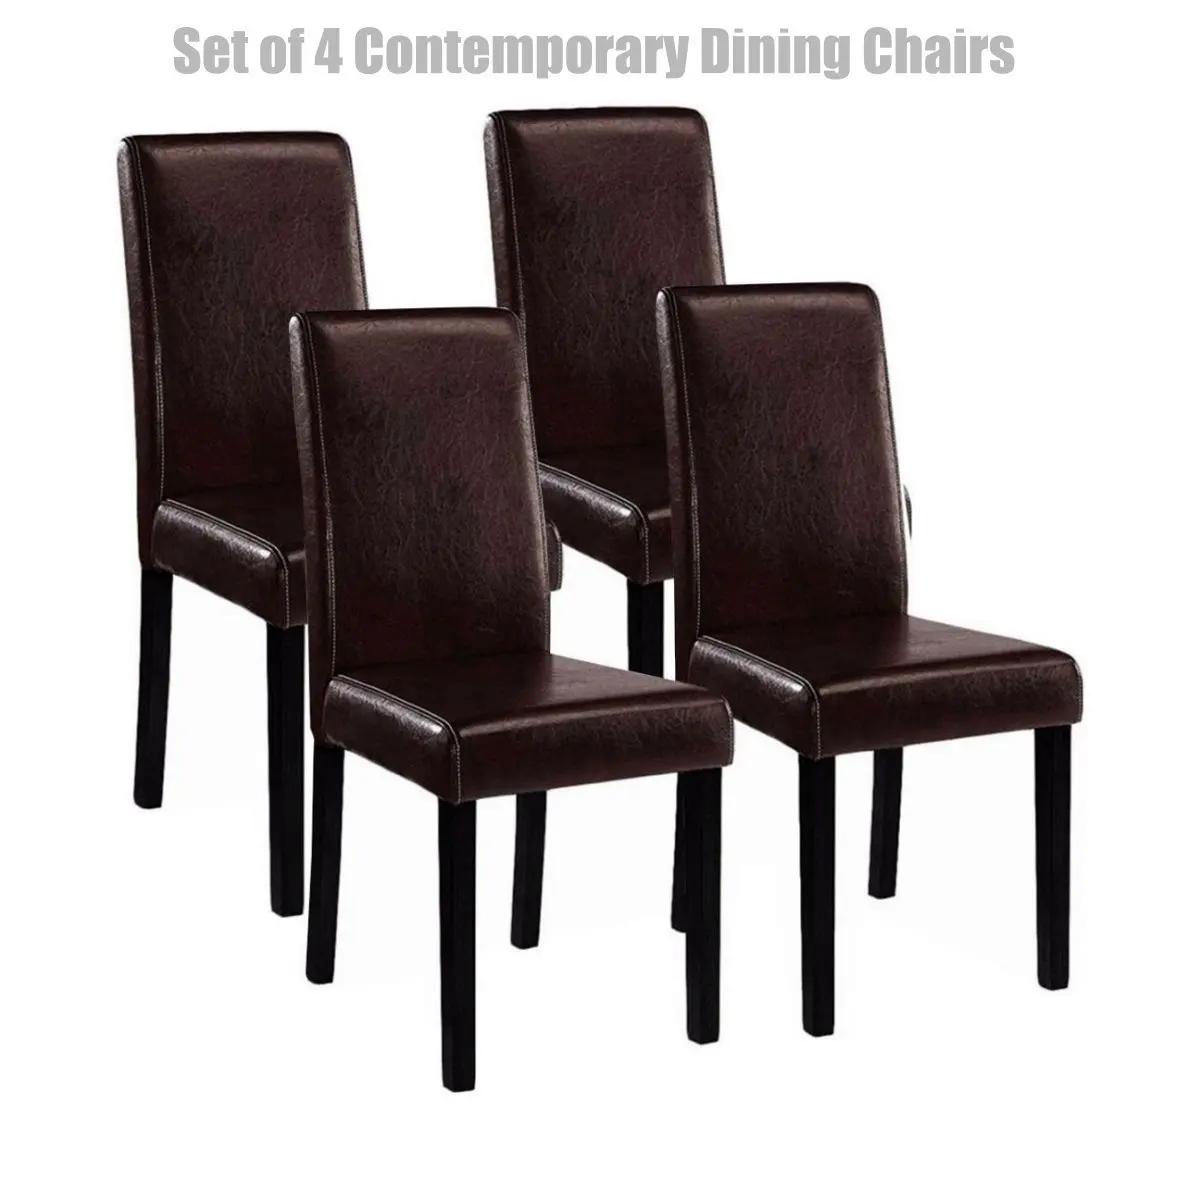 Buy Classic Contemporary Design Dining Chairs Durable Half PU Leather ...